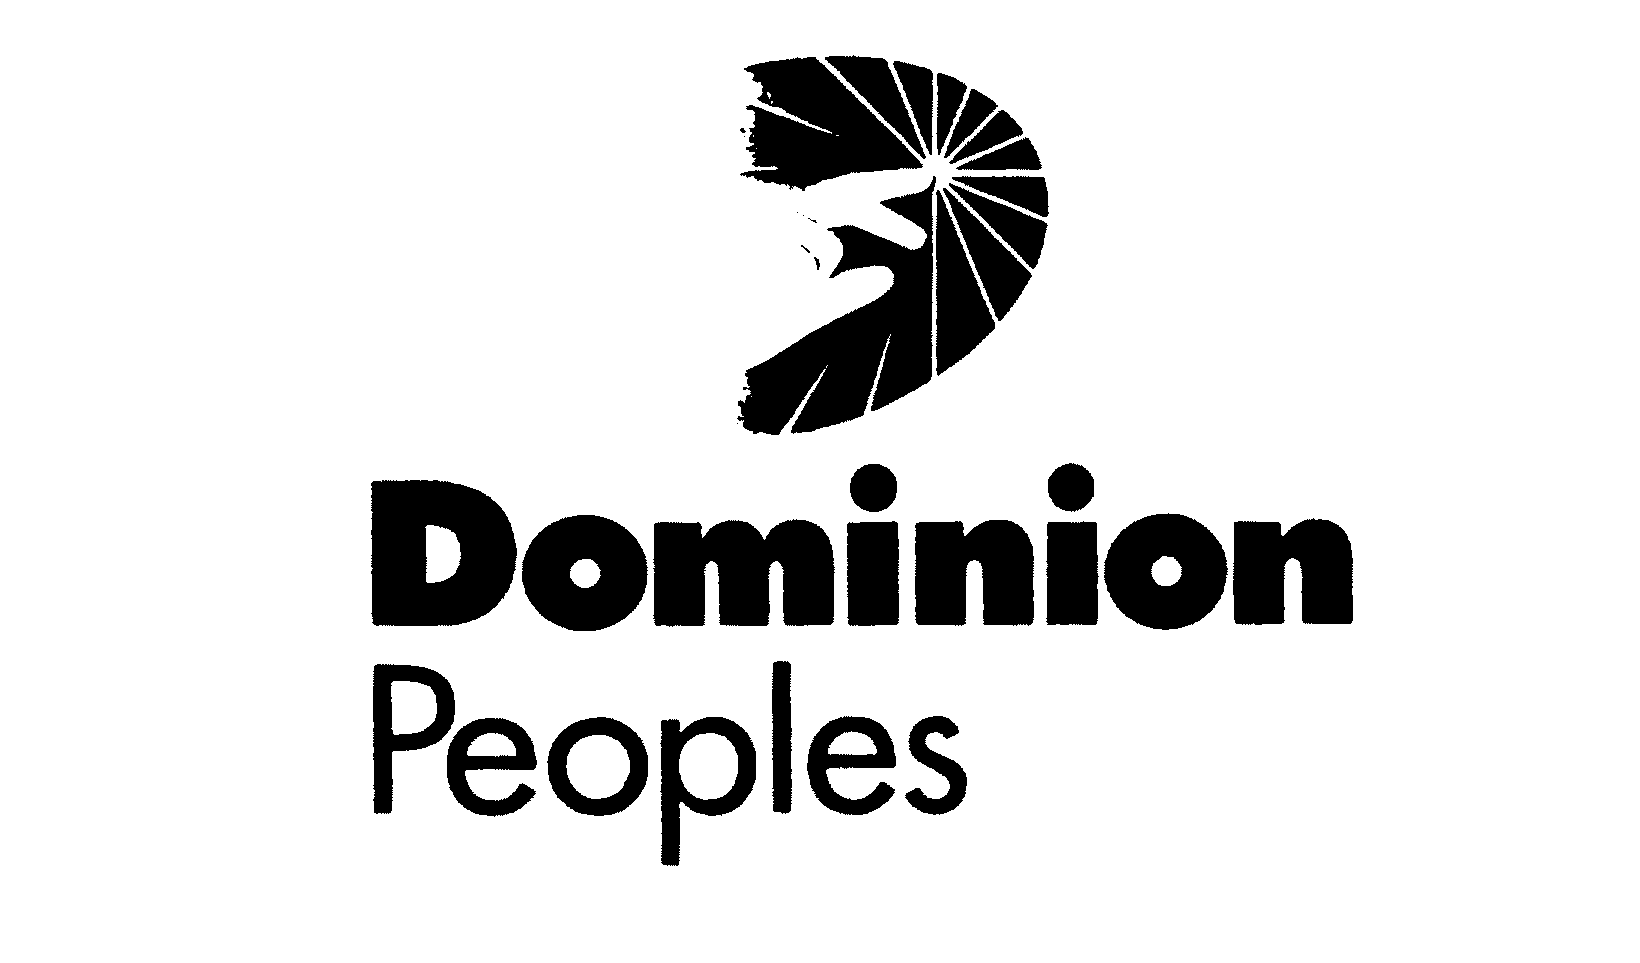  DOMINION PEOPLES